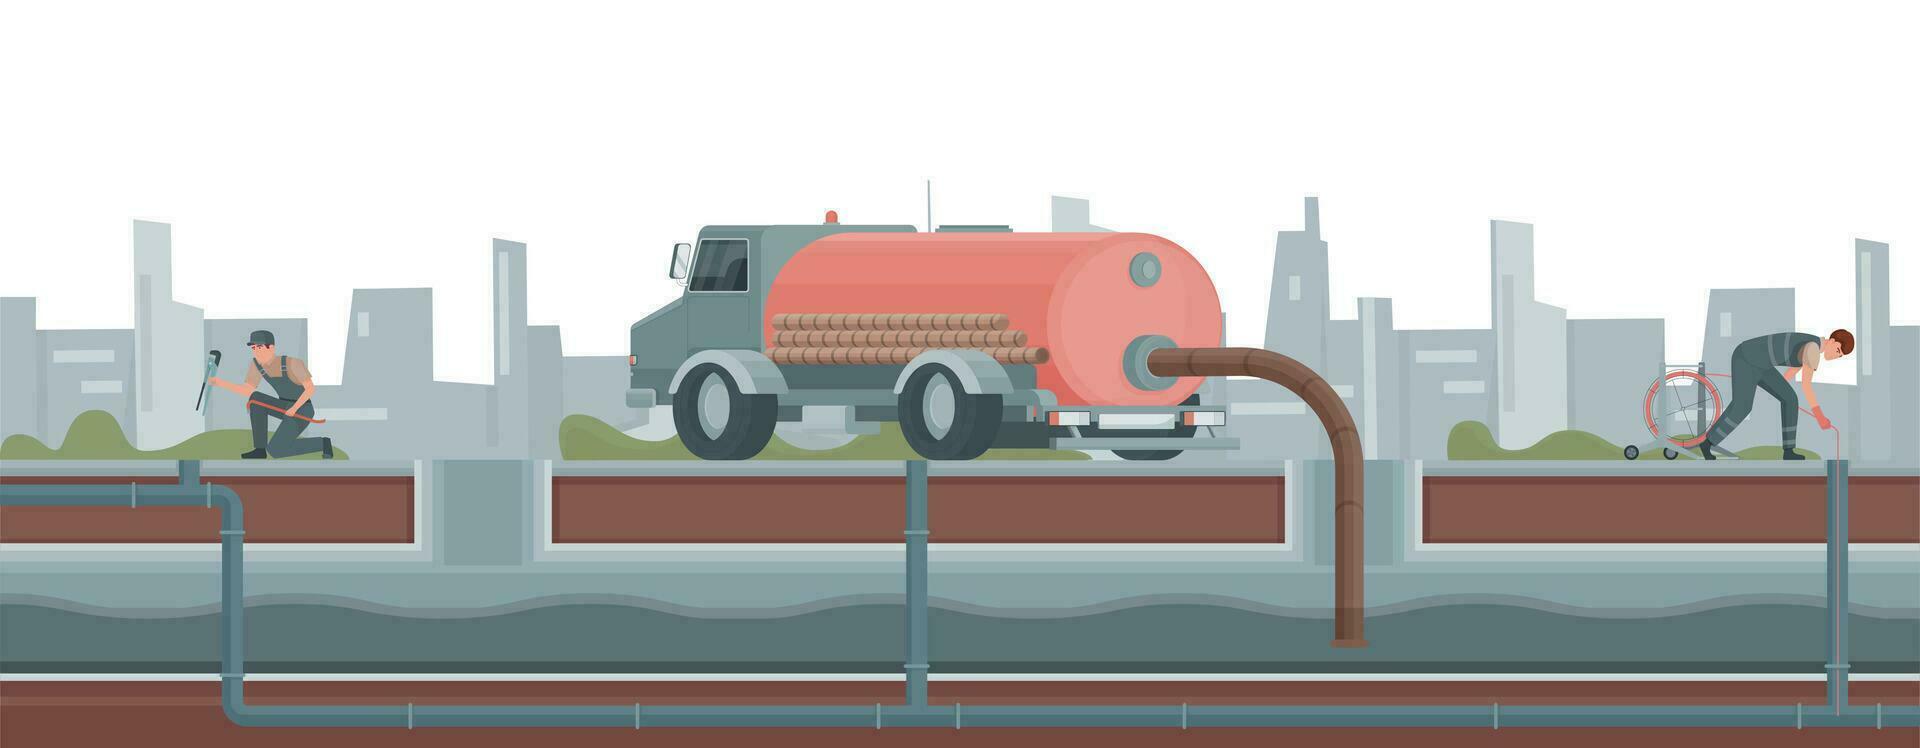 Water Pipe Sewerage Composition vector